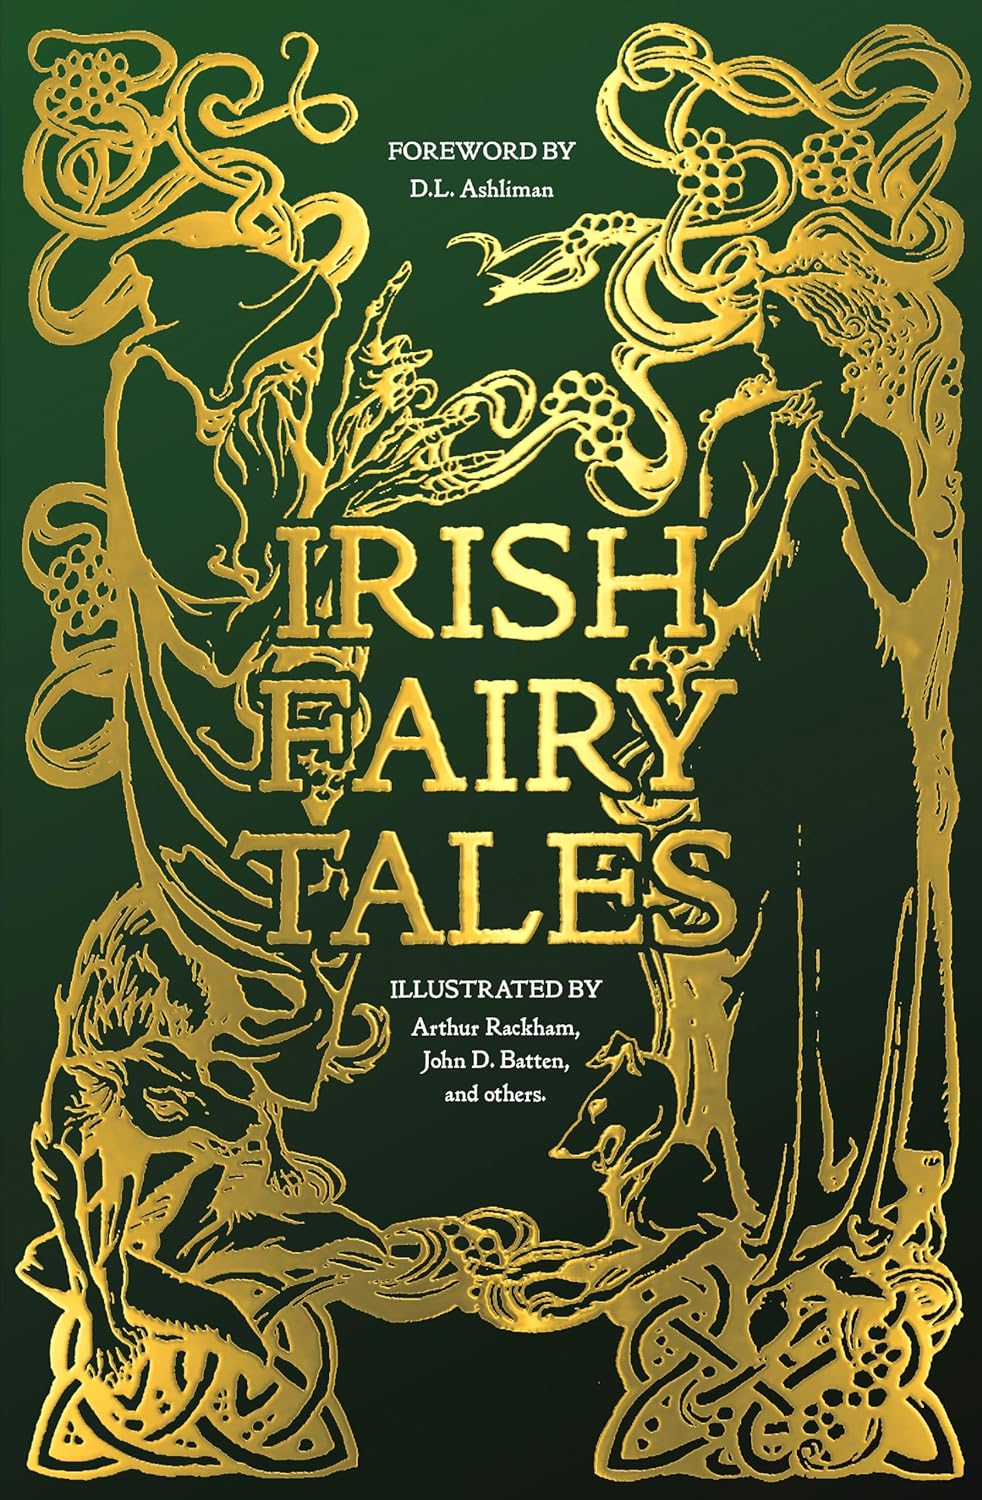 D.L. Ashliman (foreward by): Irish Fairy Tales, illustrated by Arthur Rackham and others